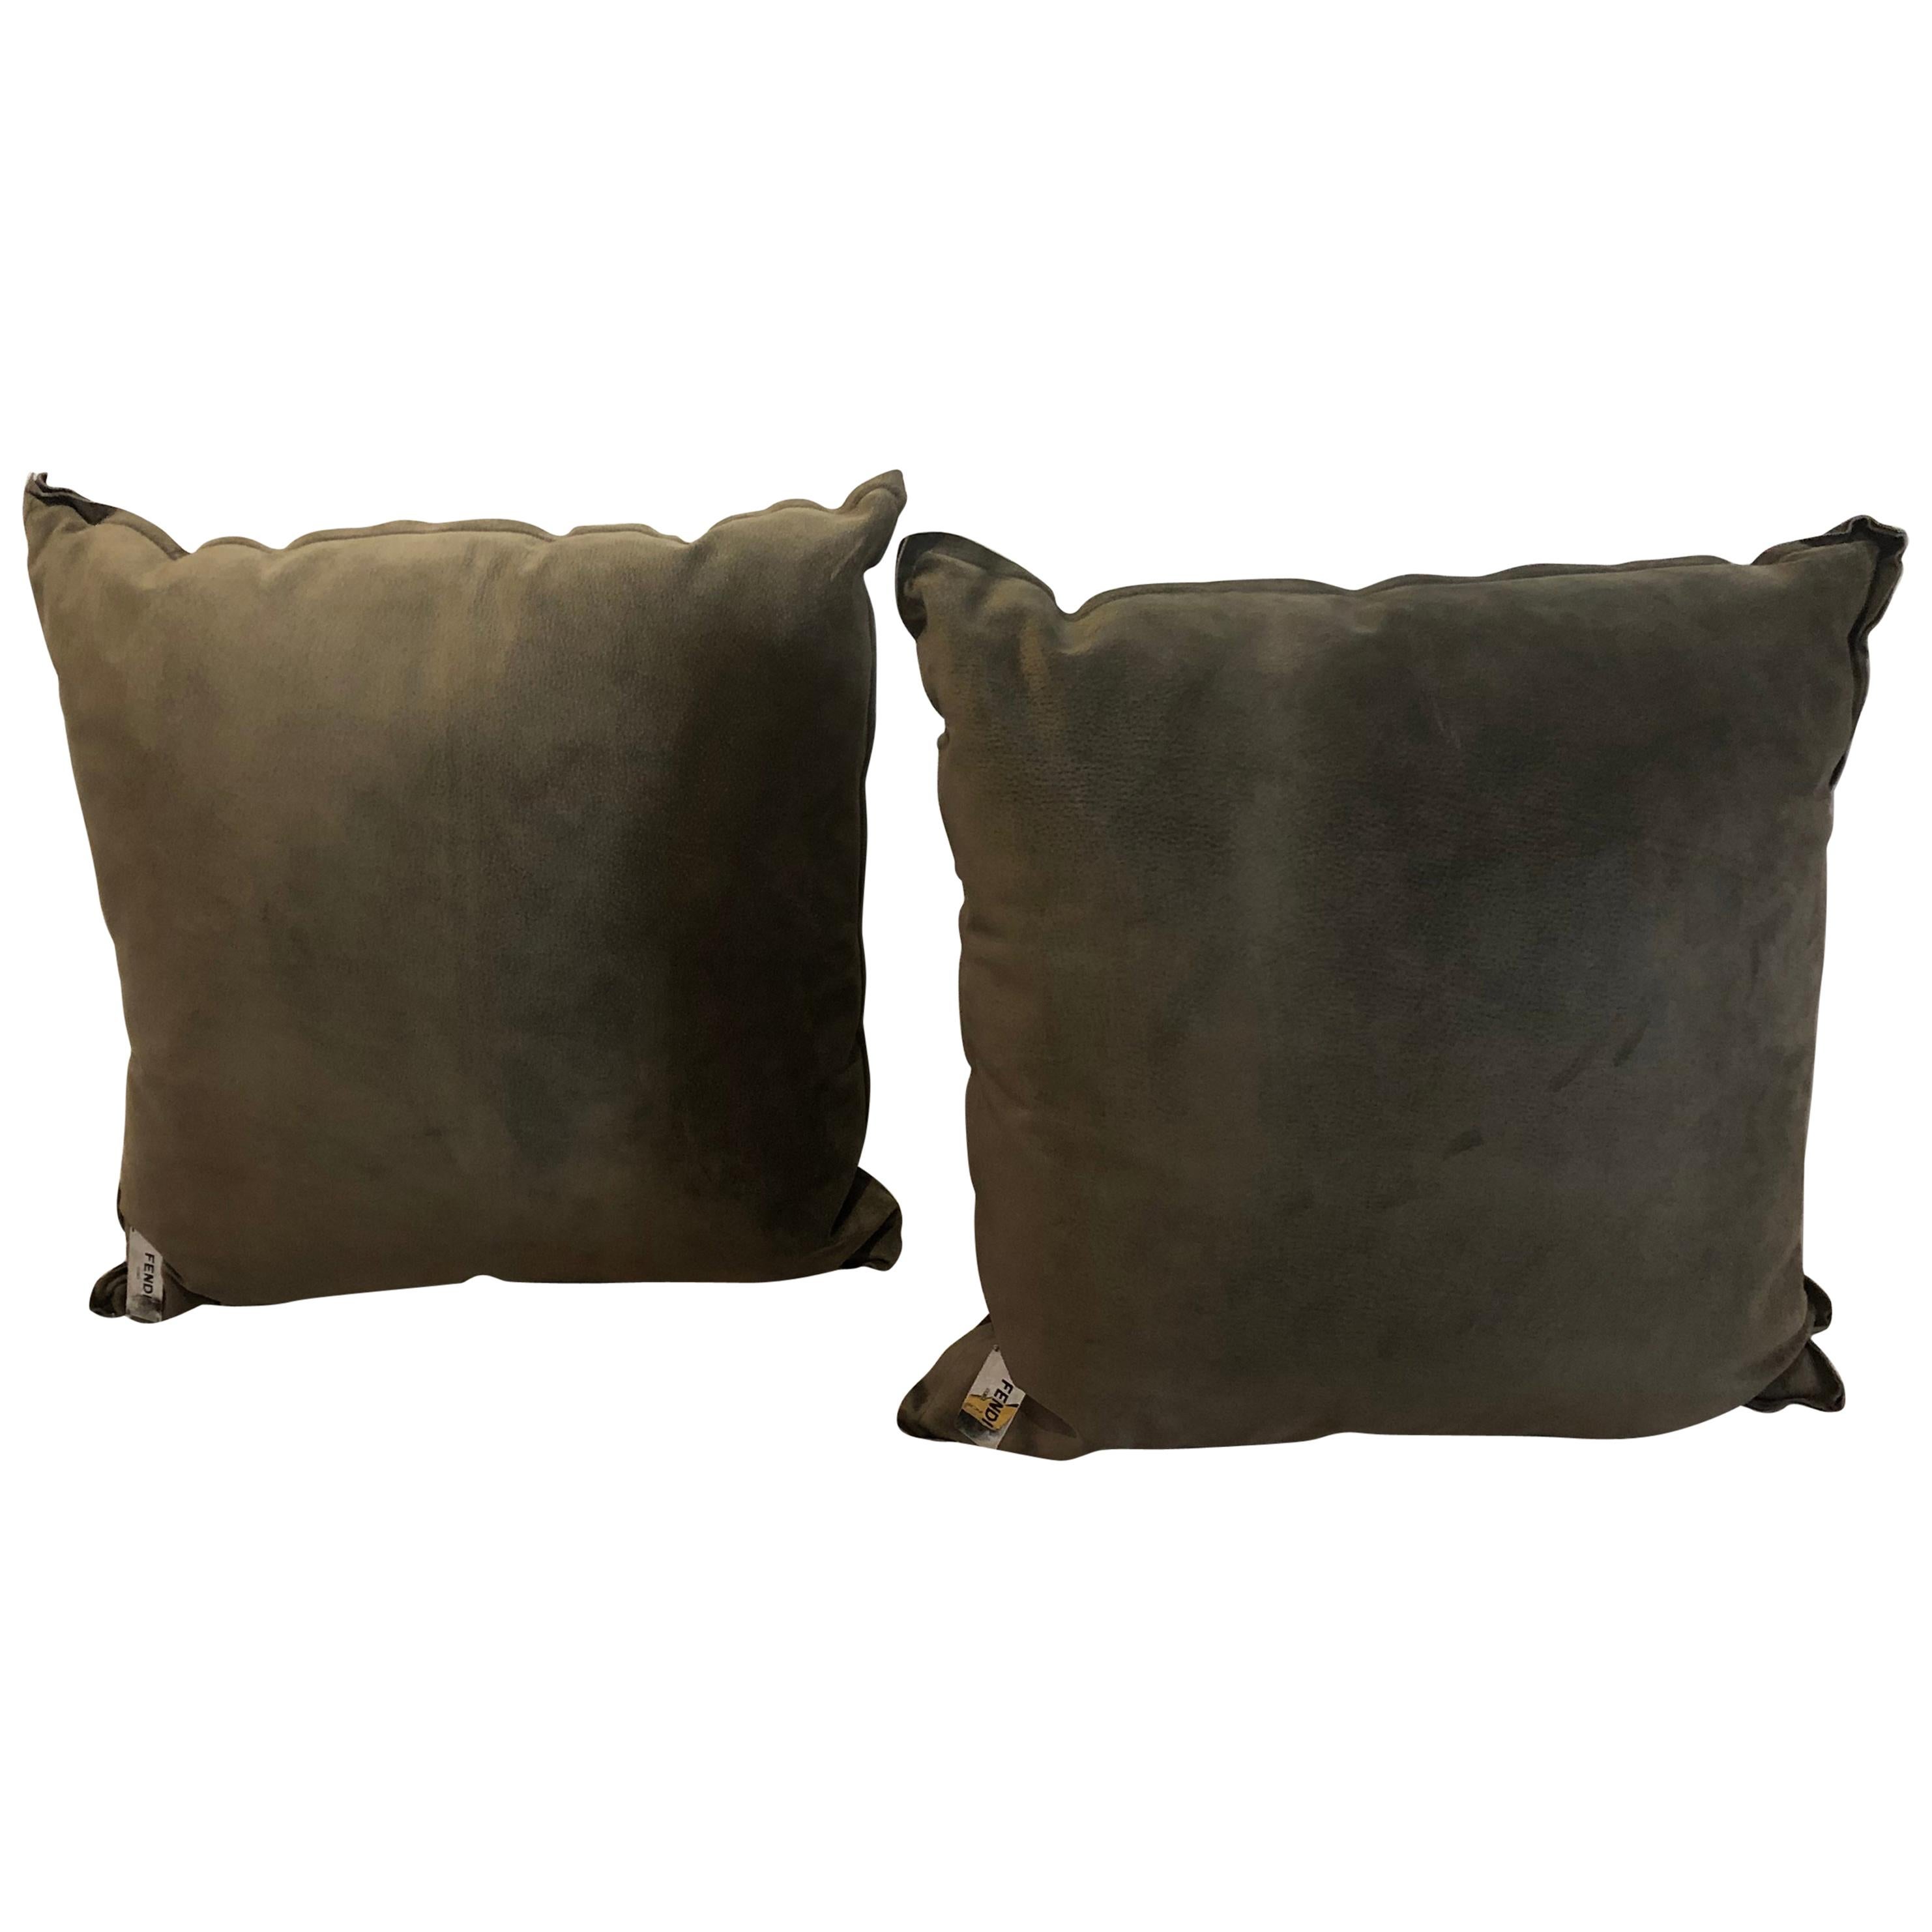 Pair of Fendi Large Suede Pillows